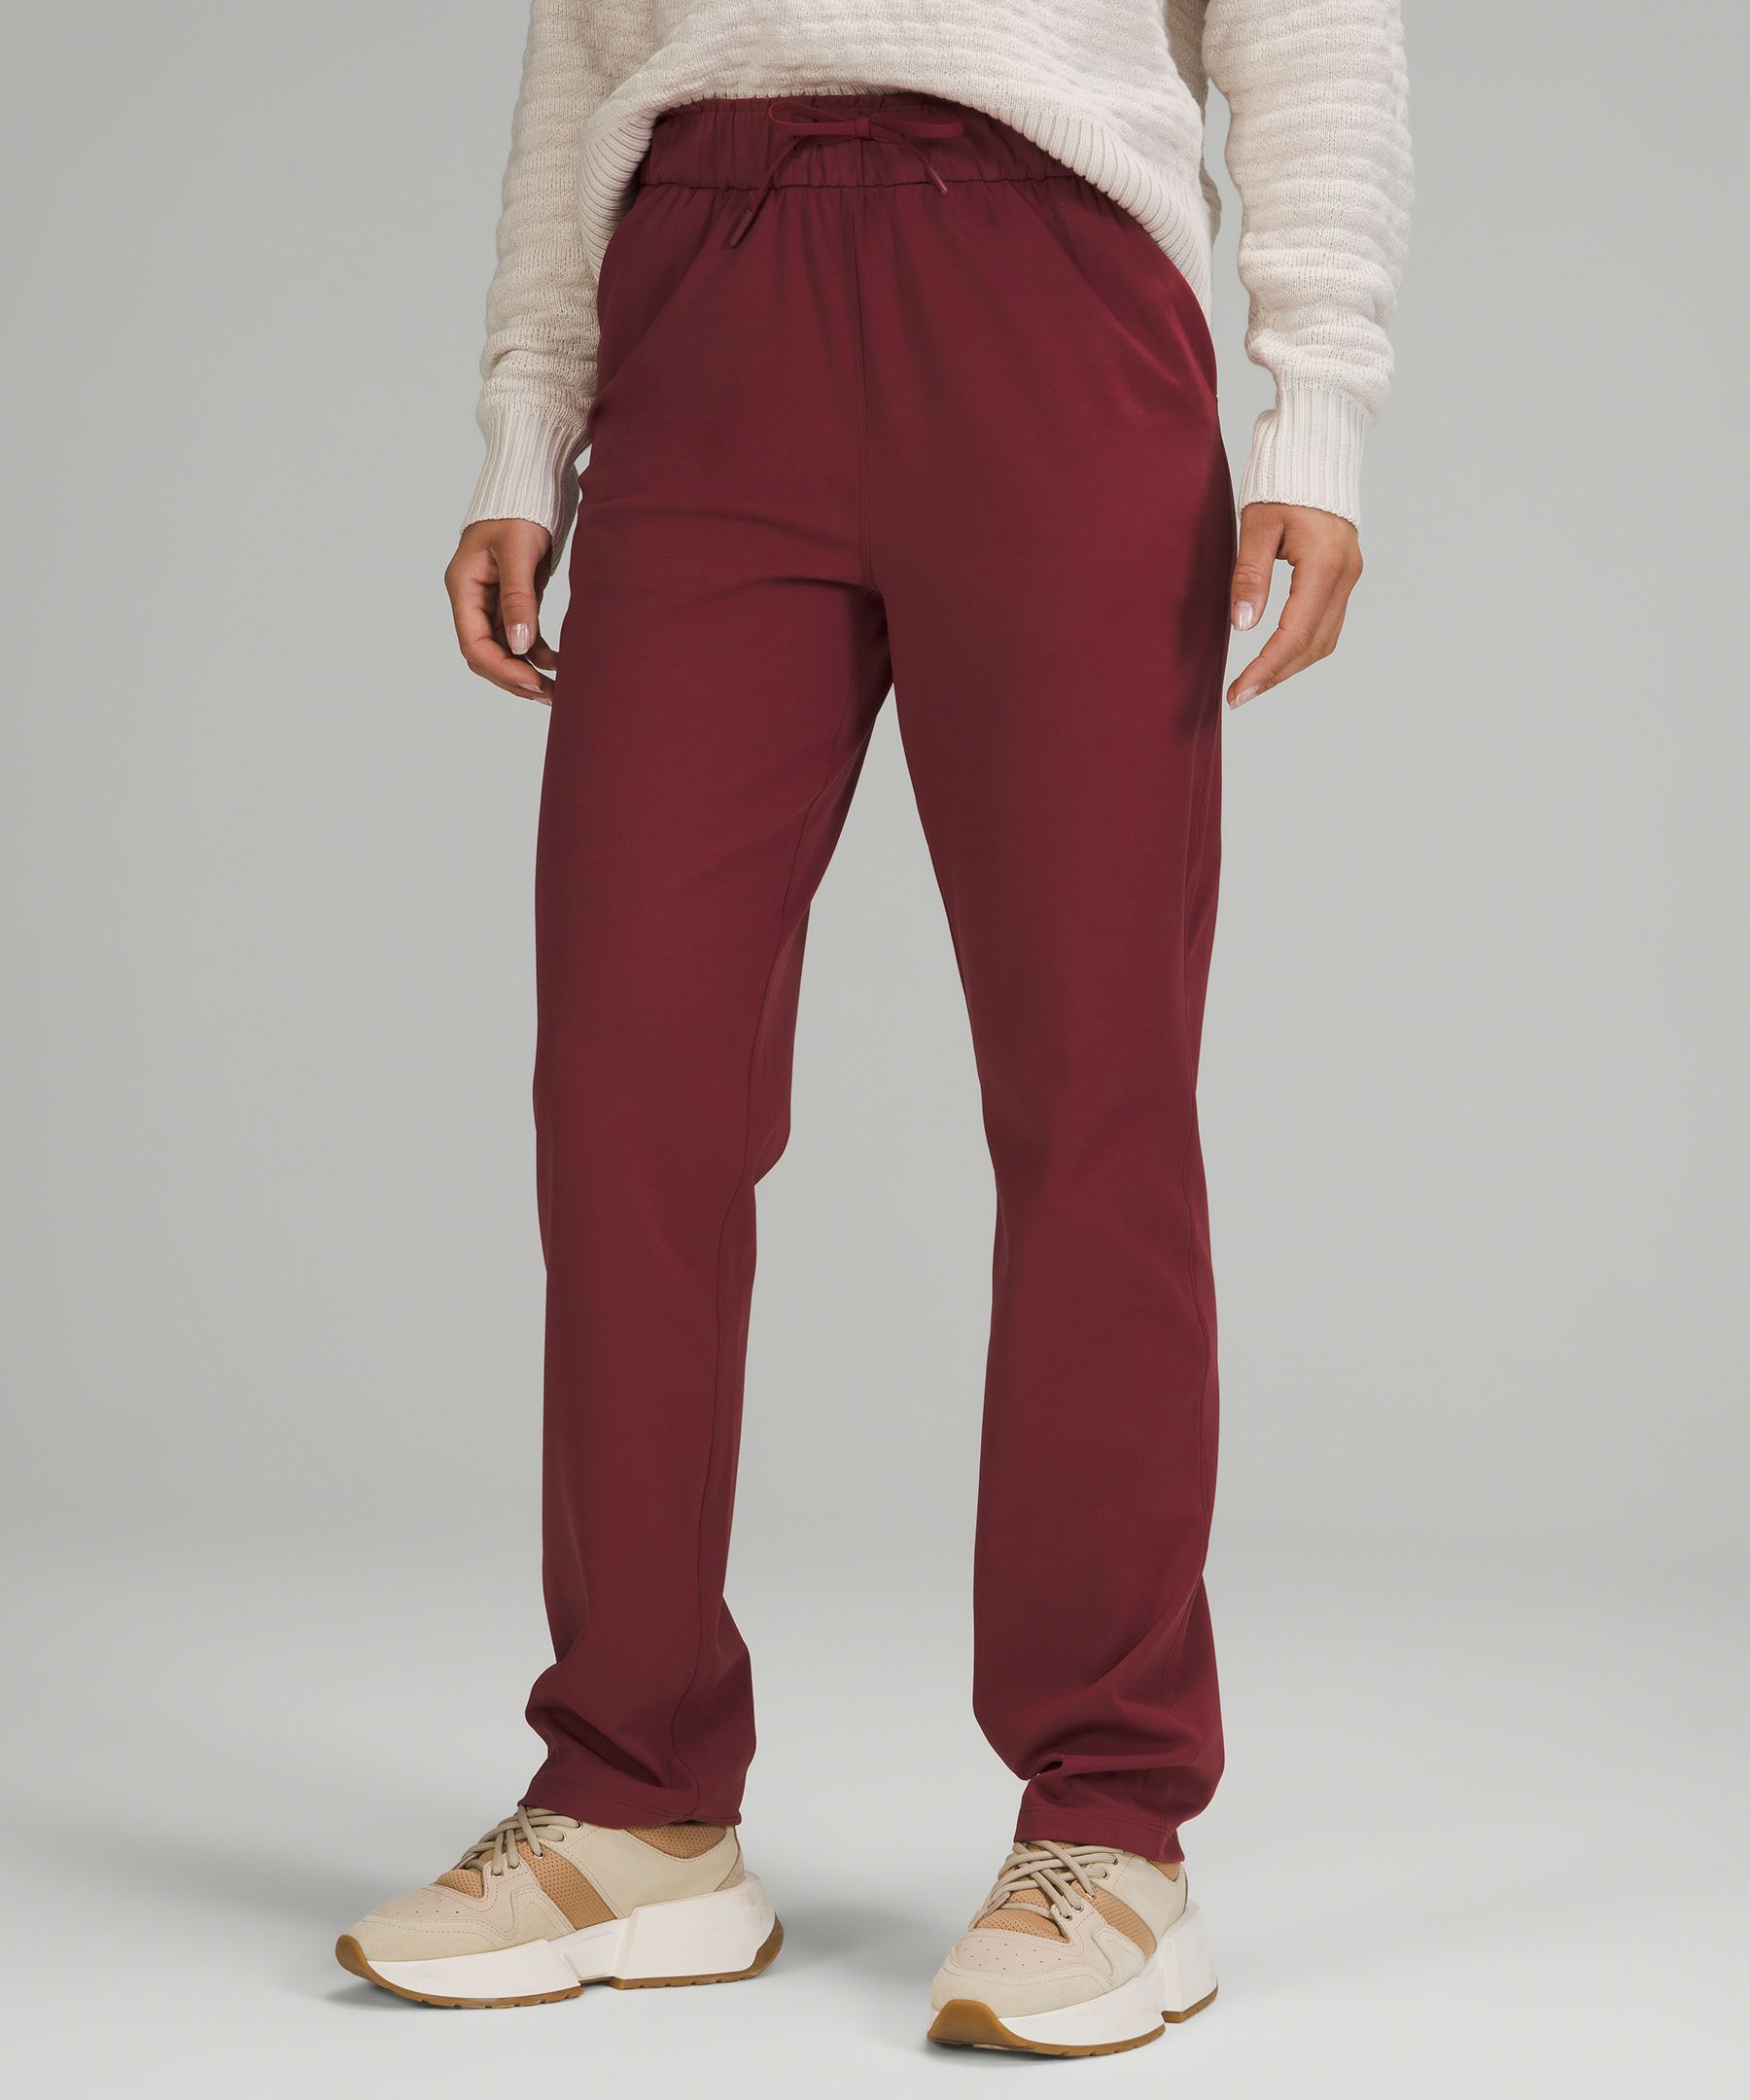 Lululemon Stretch High-rise Pants In Mulled Wine